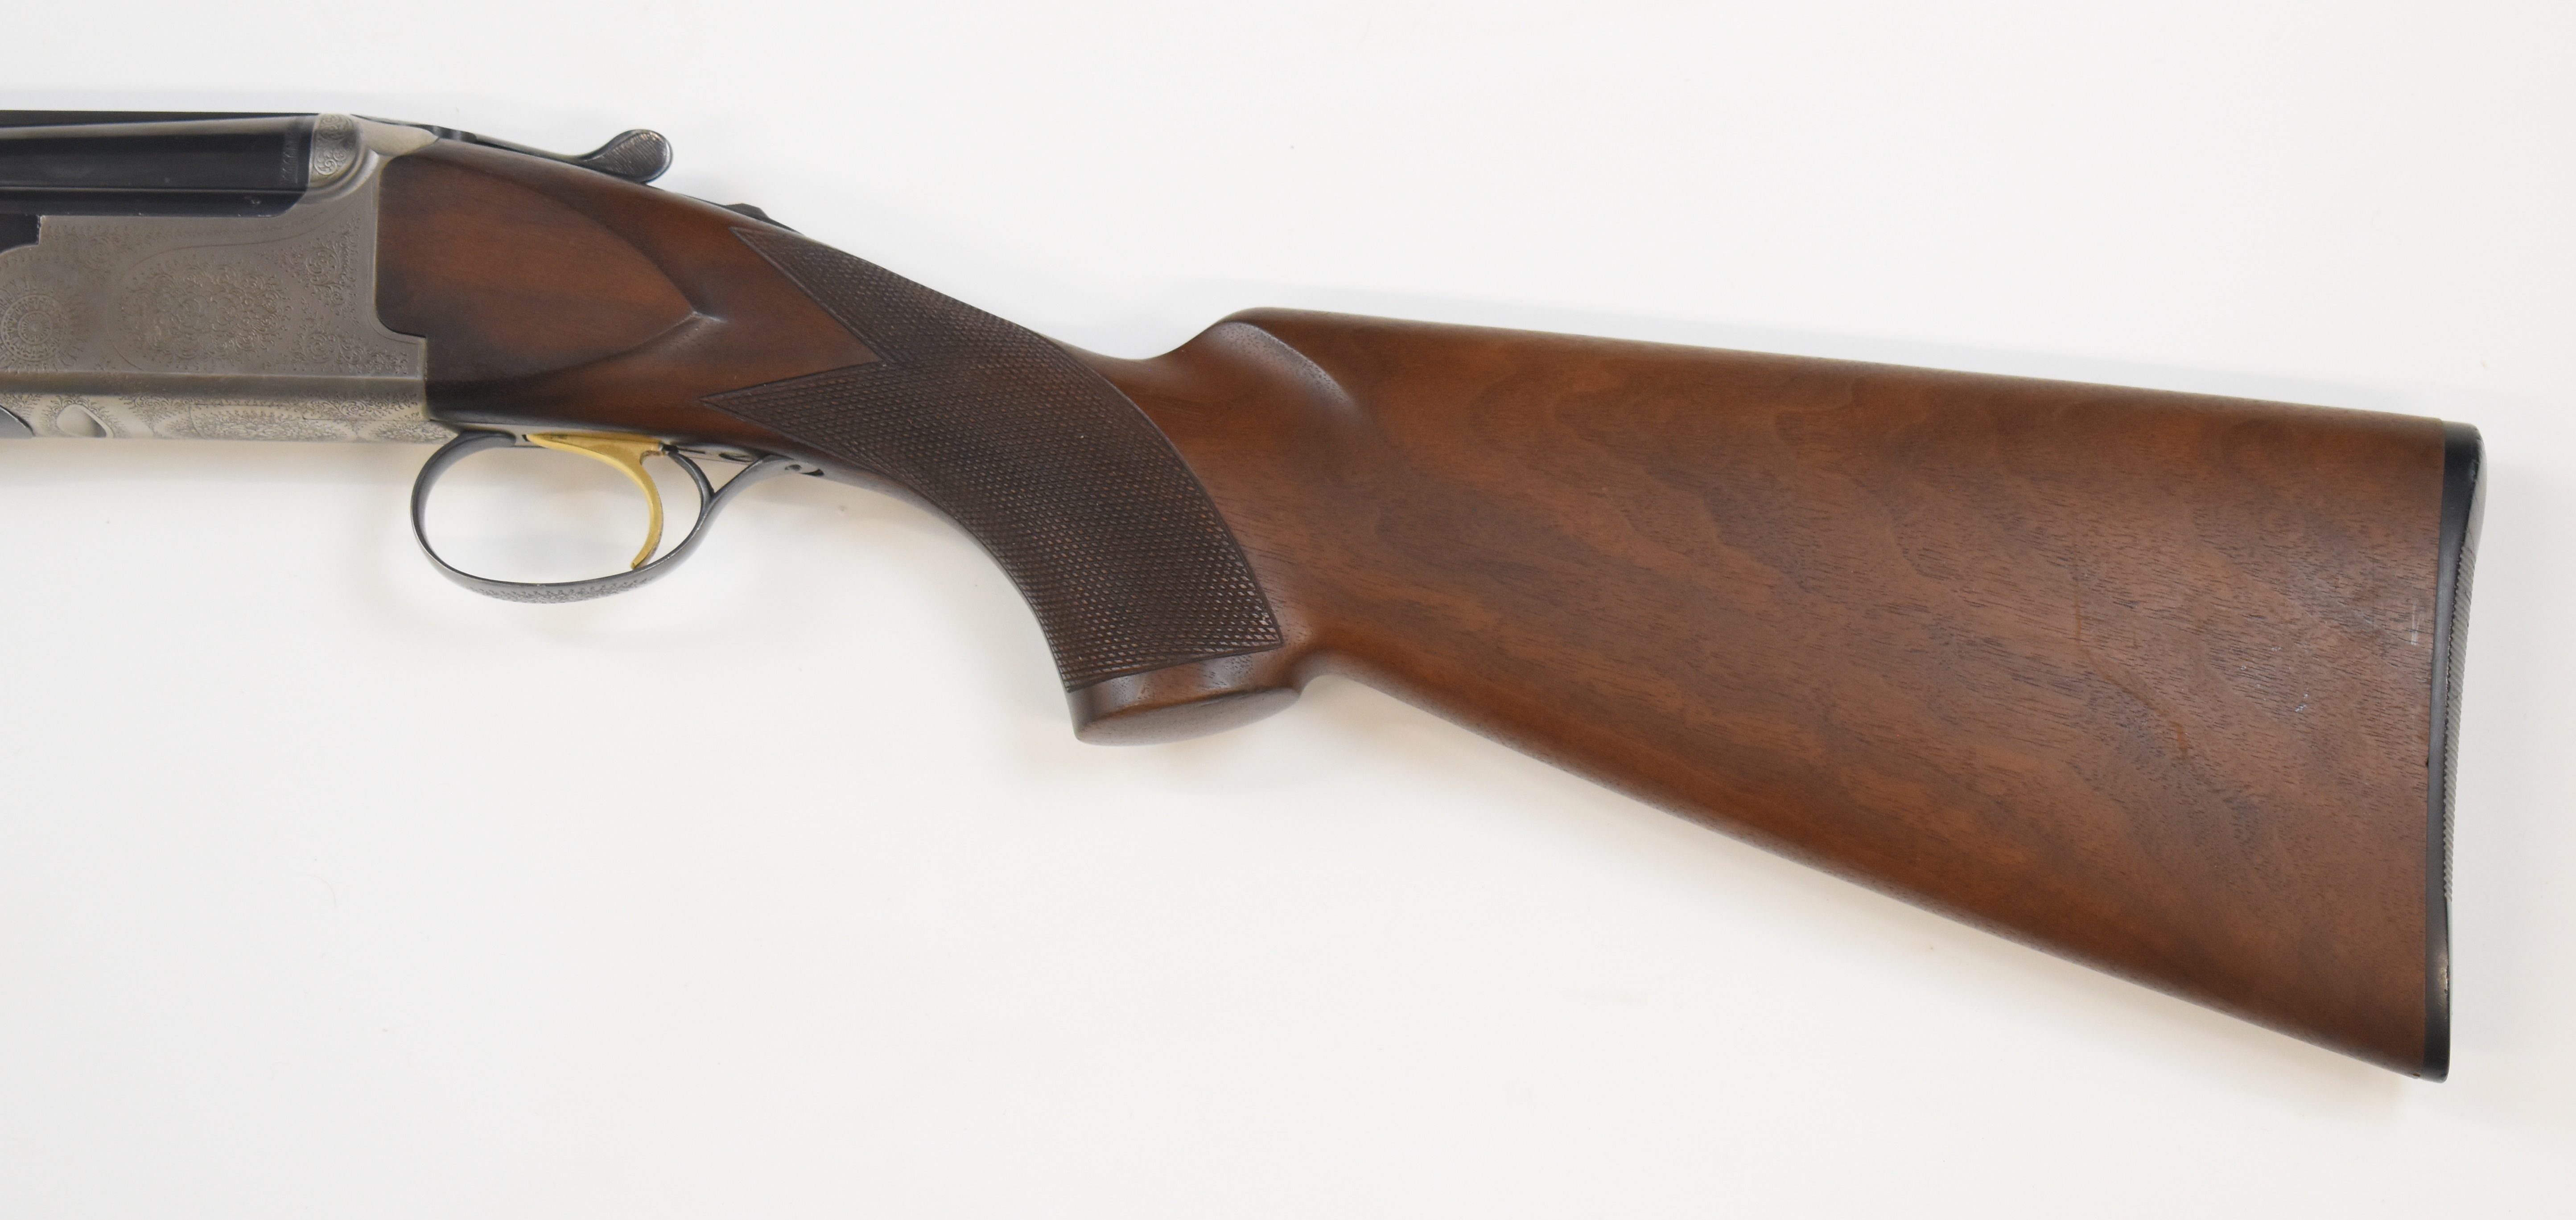 Parker-Hale 12 bore over and under ejector shotgun with named and engraved lock, engraved trigger - Image 7 of 10